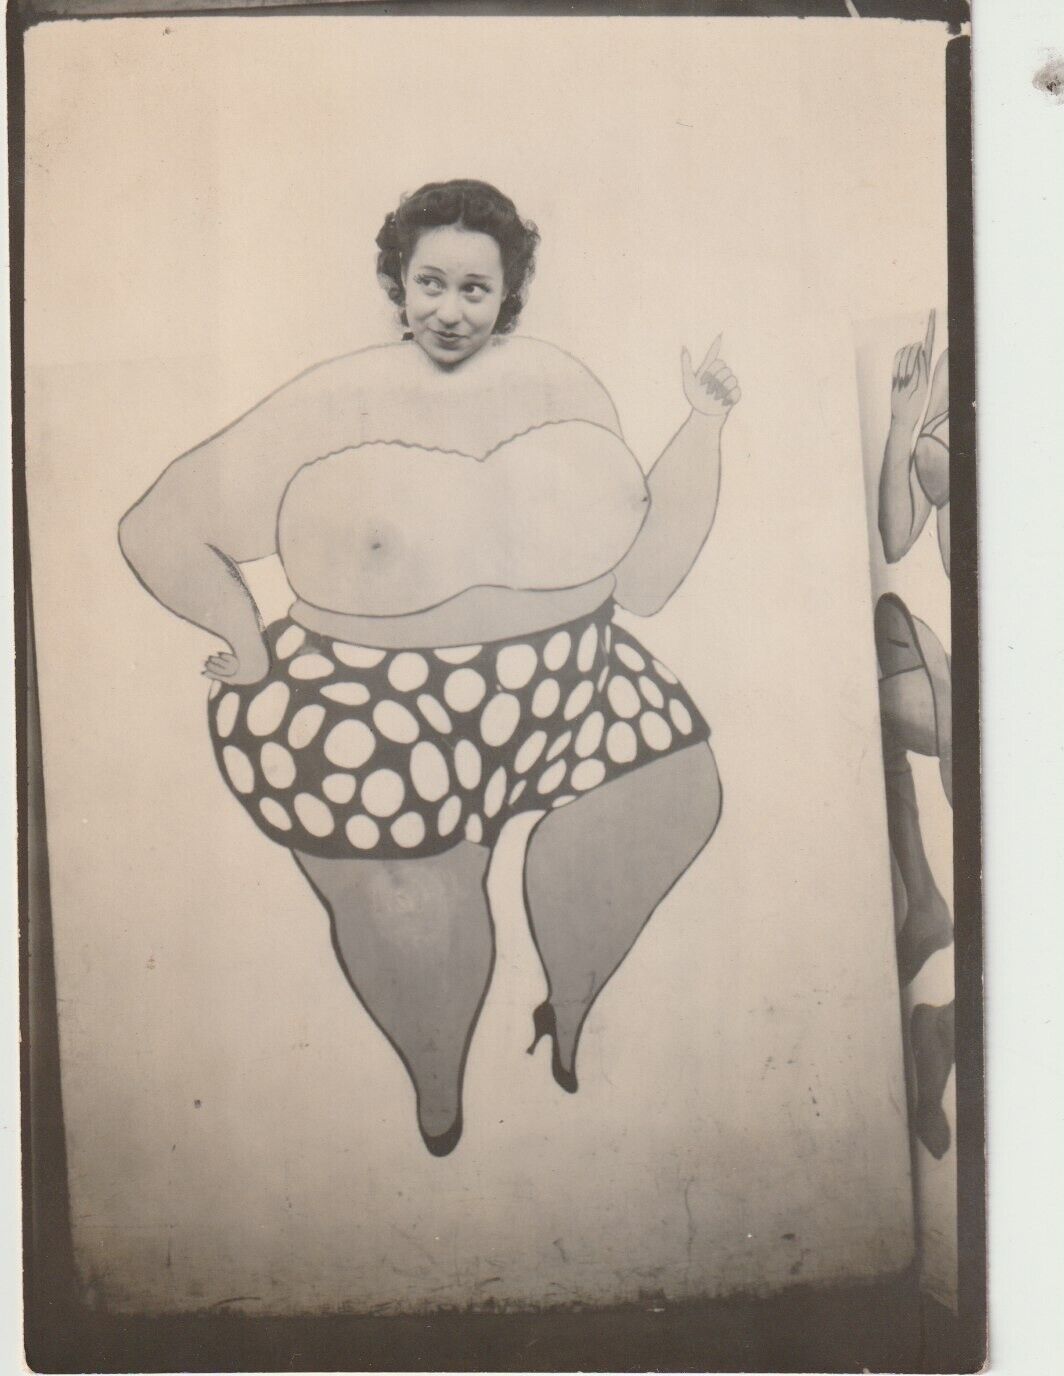 Vintage CUTOUT ARCADE PHOTO BOOTH - OBESE WOMAN IN TWO PIECE OUTFIT